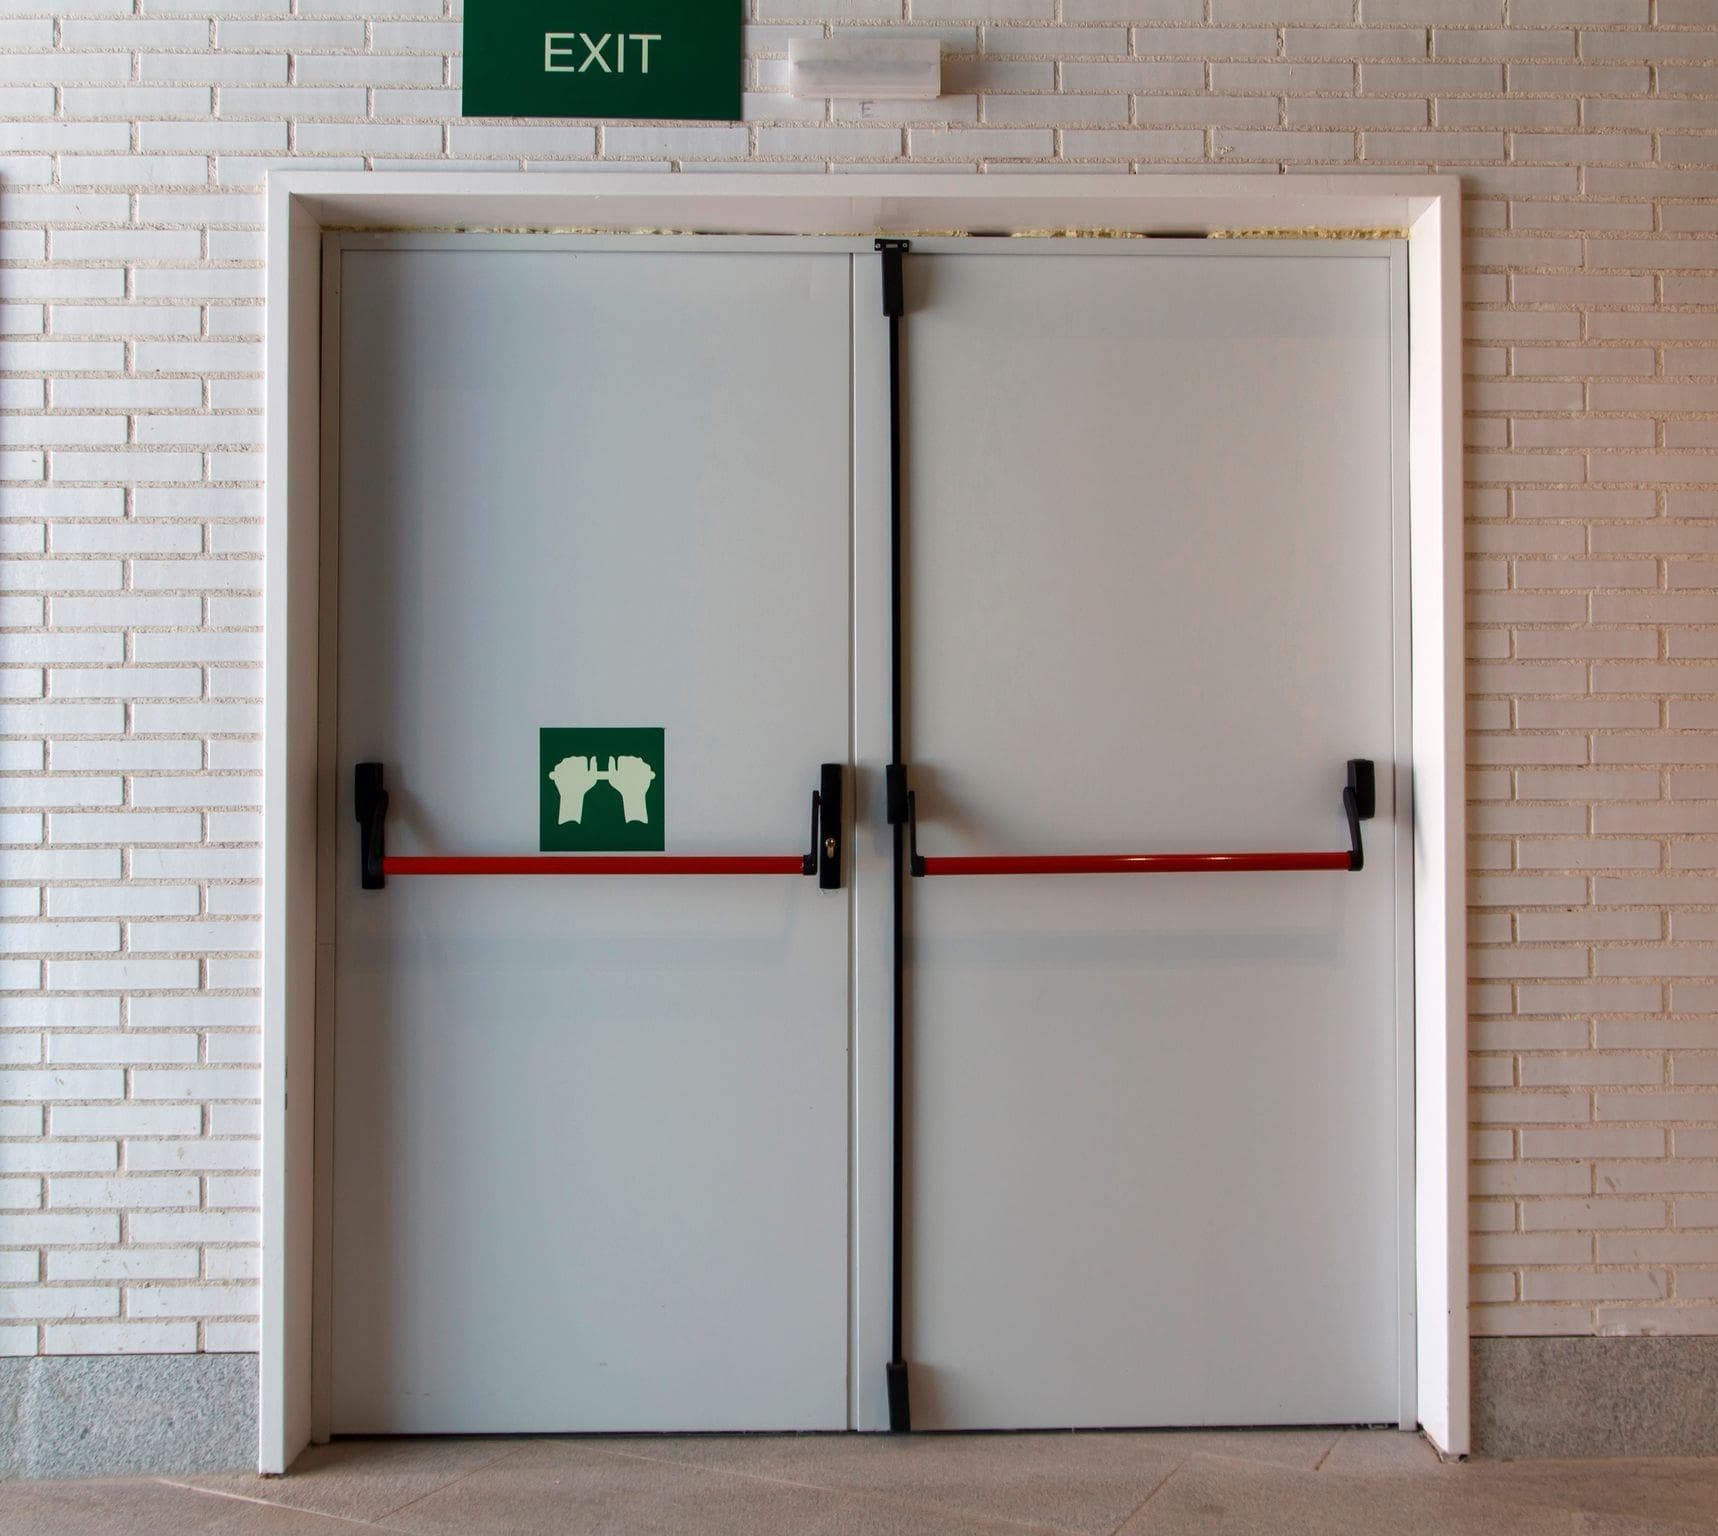 steel exit doors with white brick wall